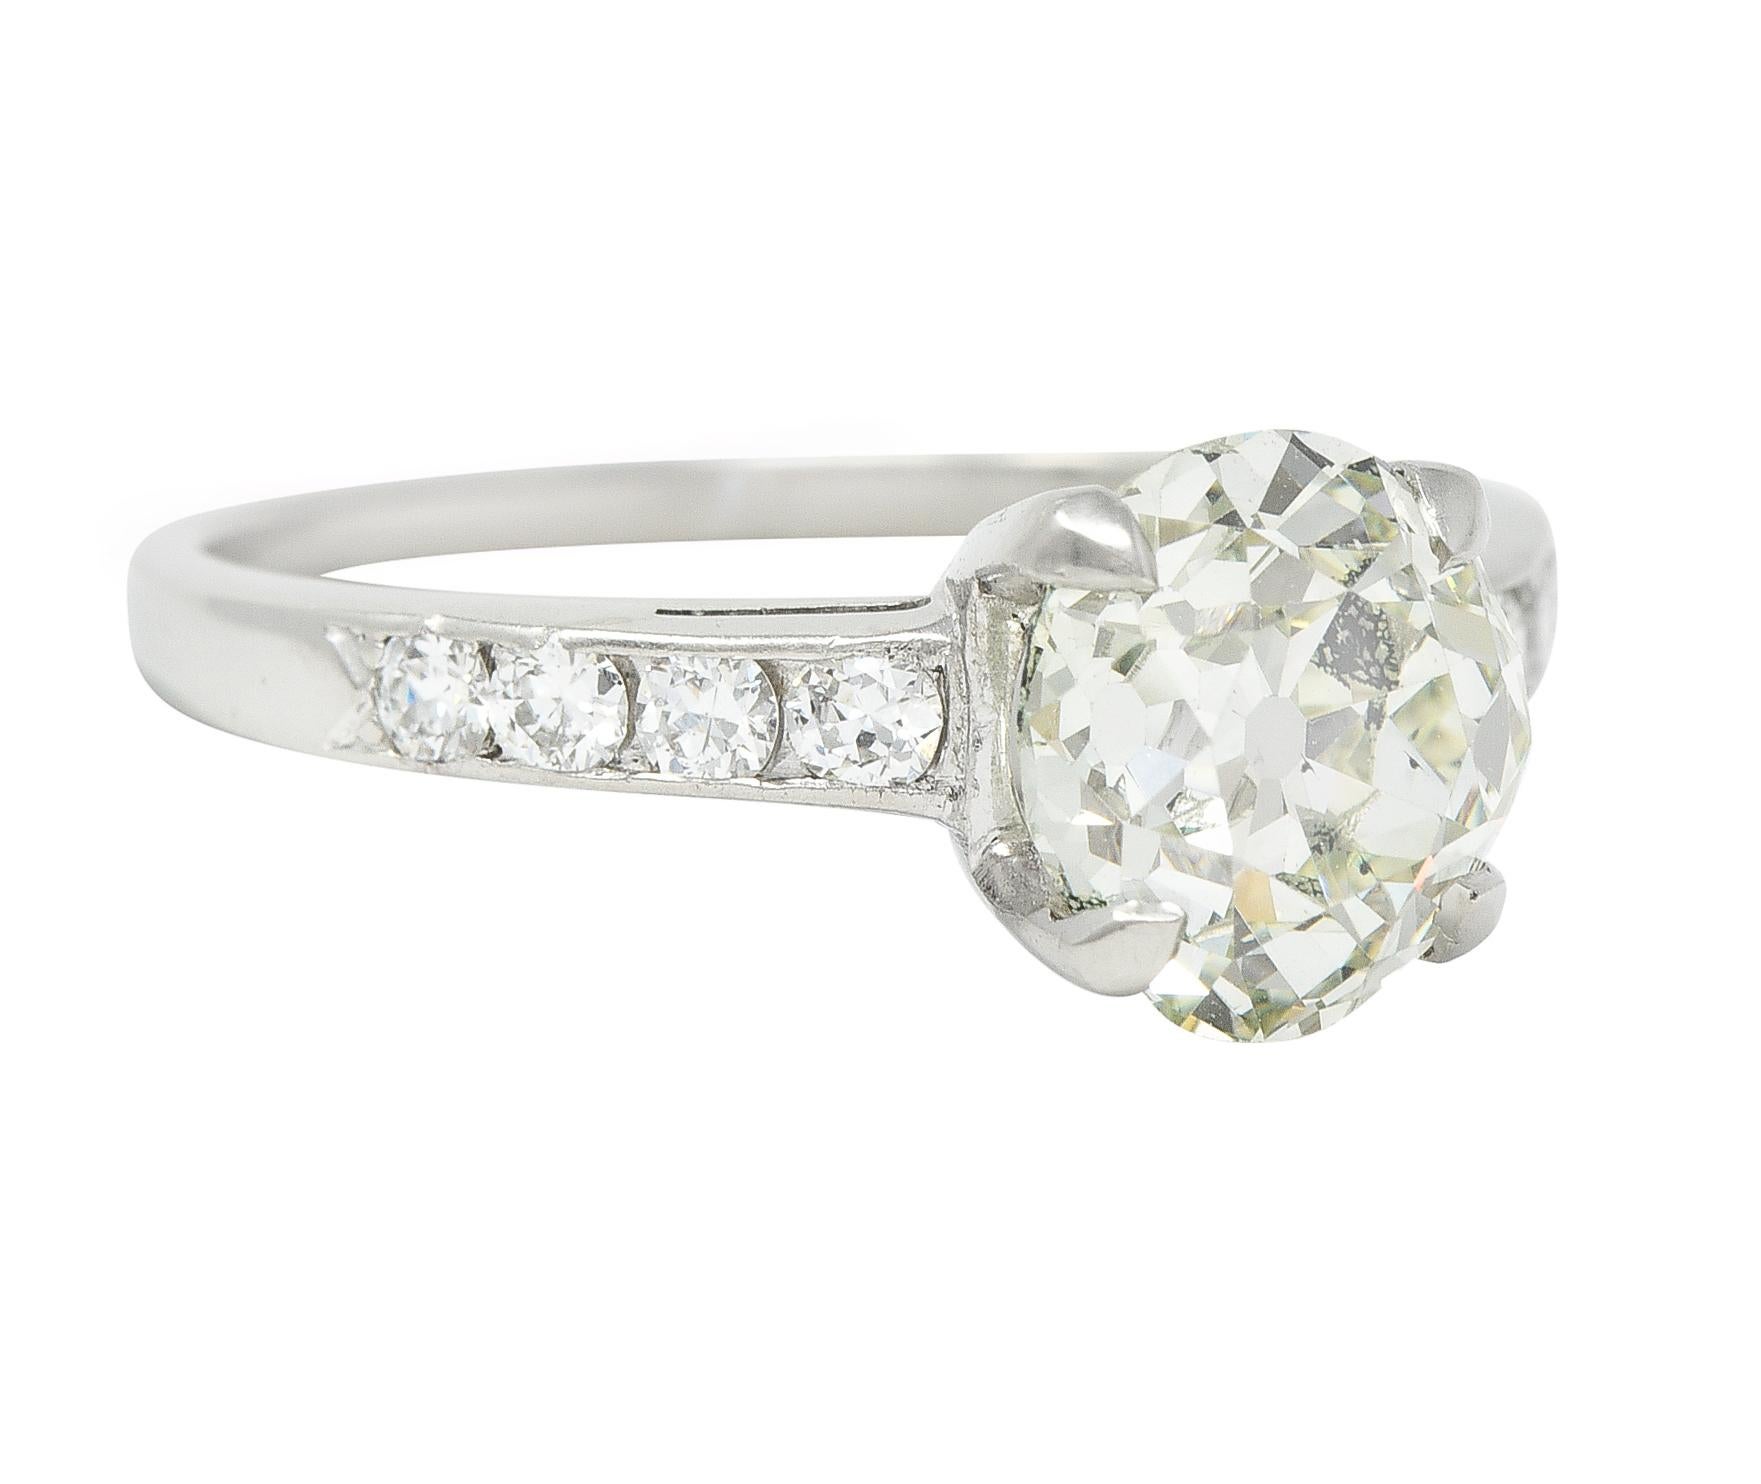 Centering an old mine-cut diamond weighing approximately 1.95 carats - fancy light greenish-yellow in color with SI2 clarity 
Prong set in basket and flanked by cathedral shoulders with channel set old European cut diamonds 
Weighing approximately